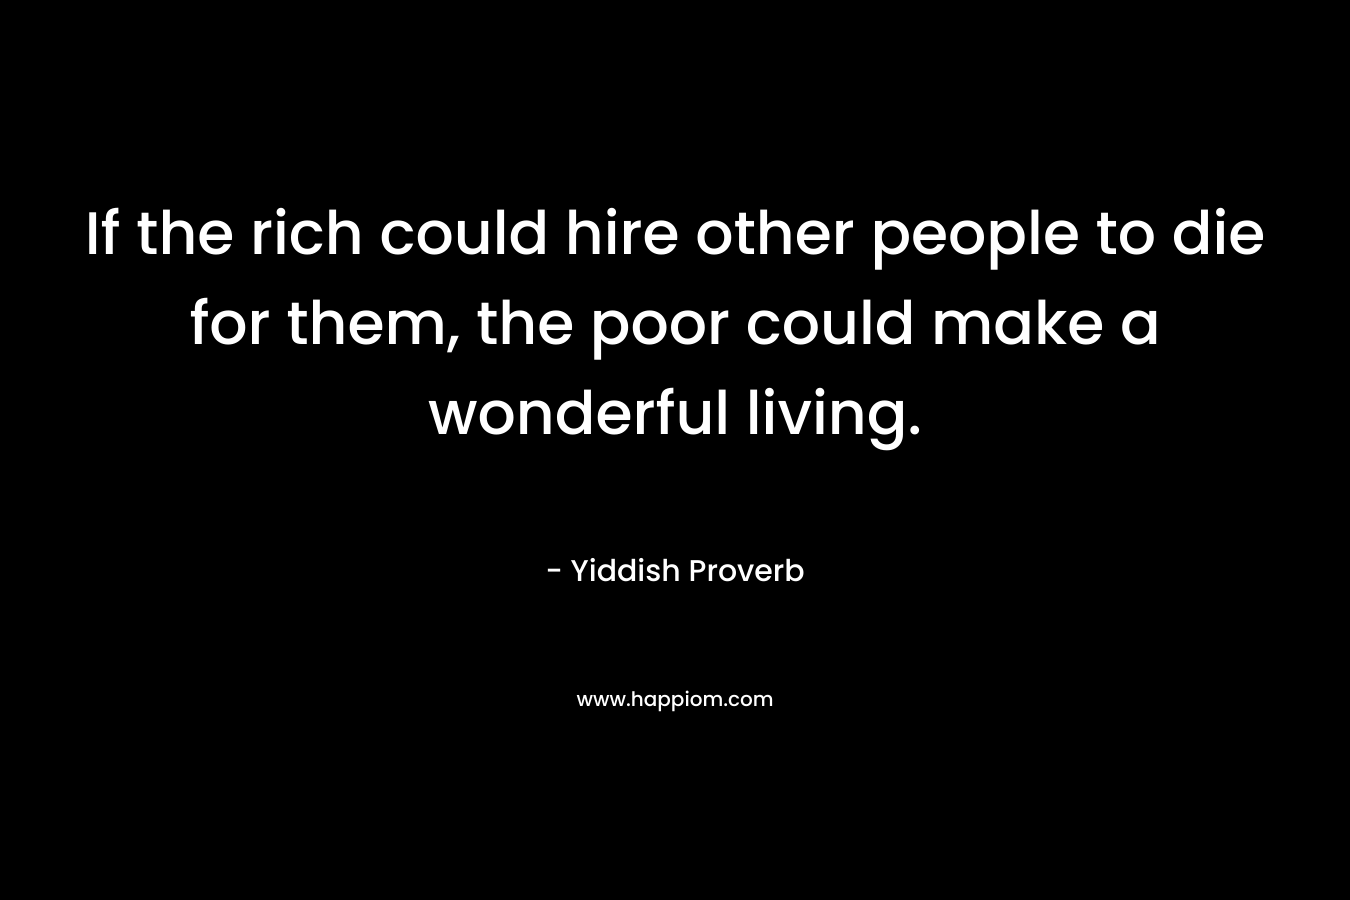 If the rich could hire other people to die for them, the poor could make a wonderful living.